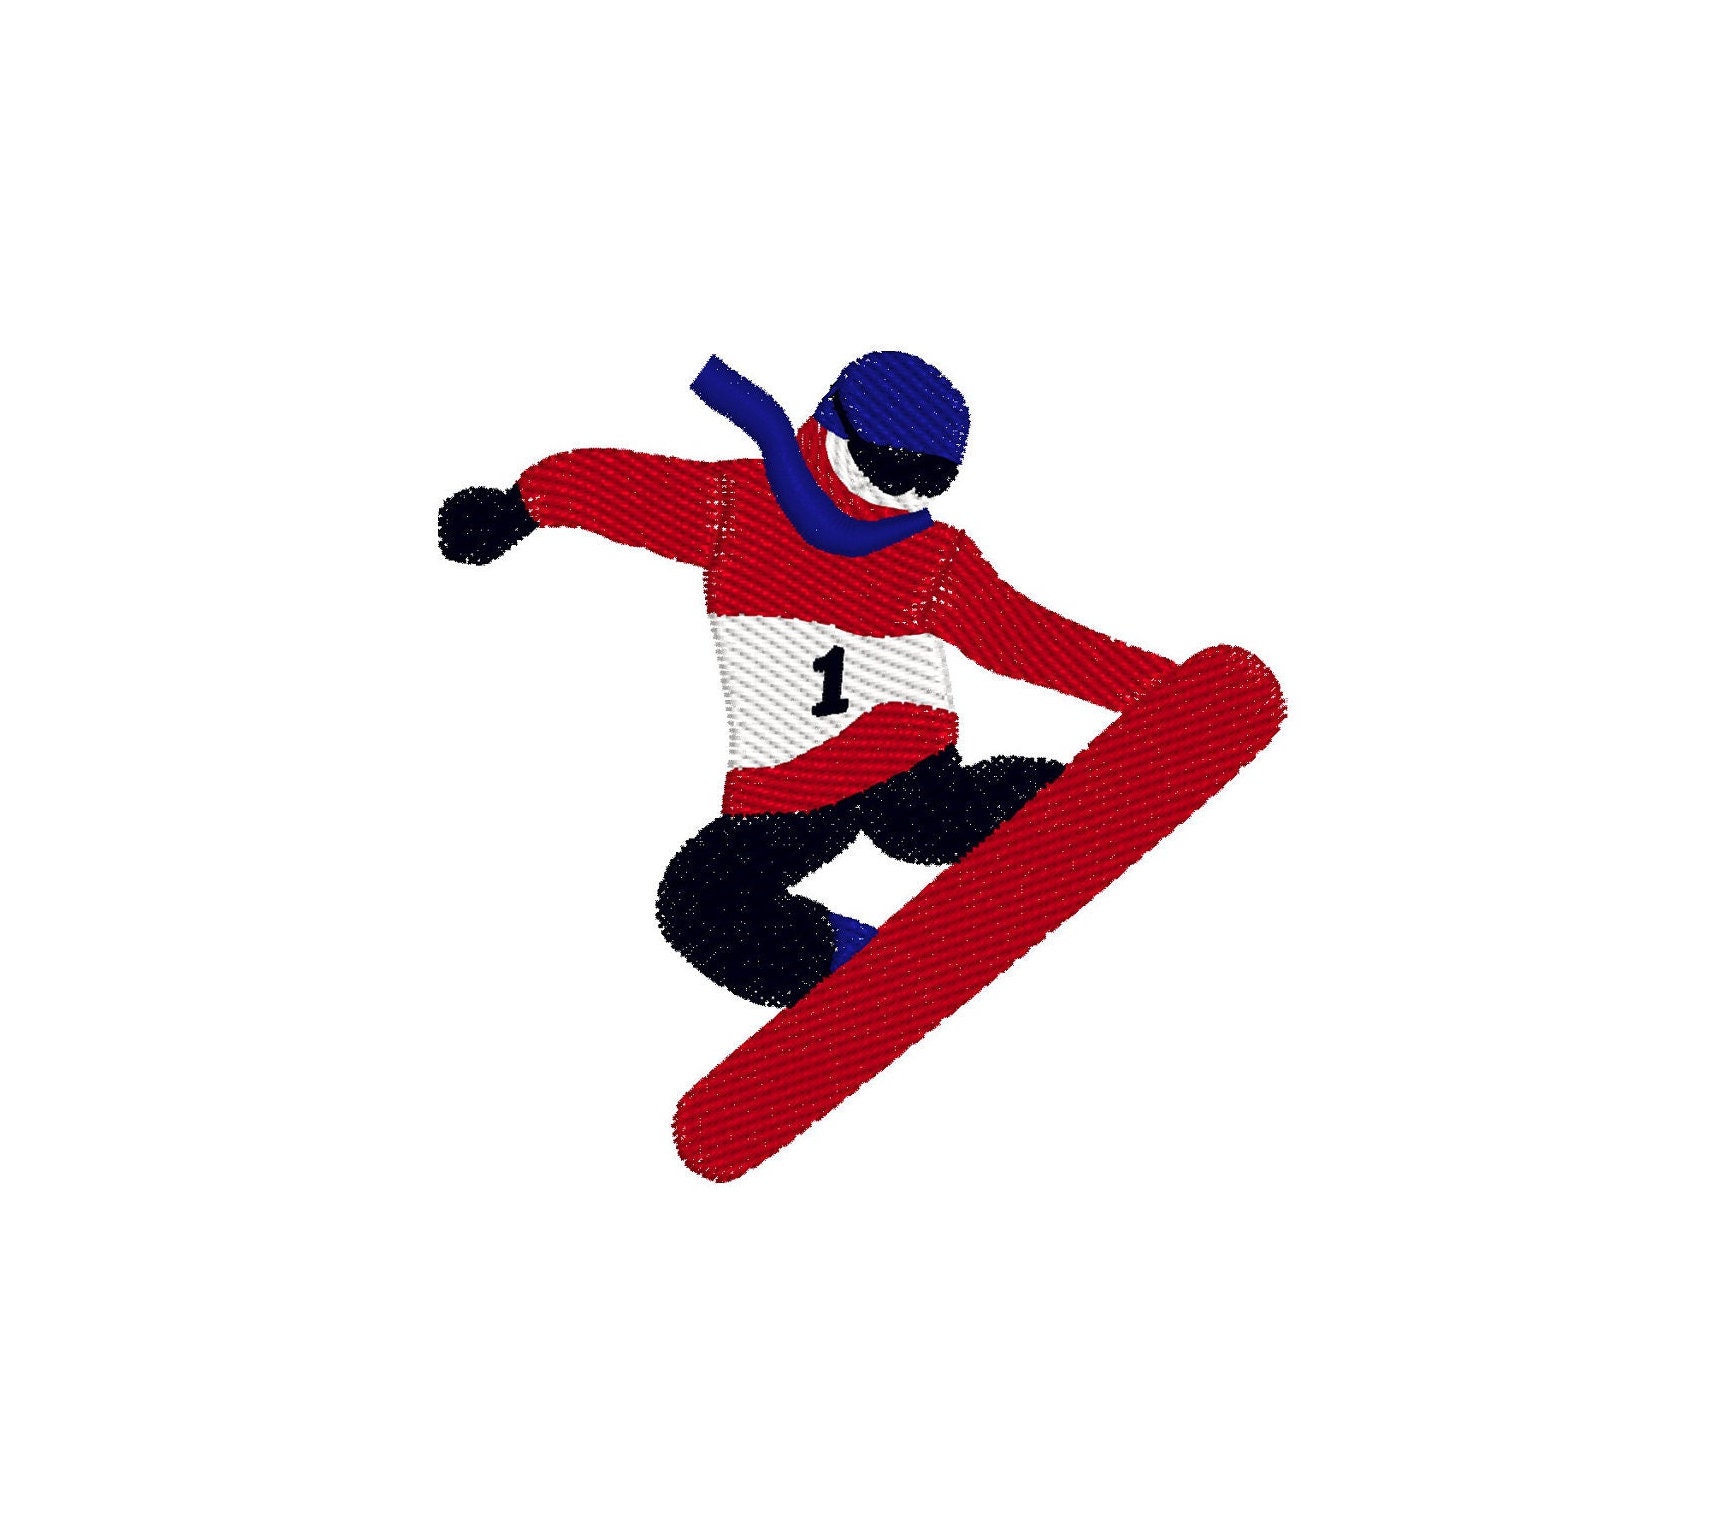 Major League Skiing Patch Red/White/Blue 9.5cm - Ski Jacket Patch - Ski  Patches - Beanie - Coat - Jacket - Hat (Red/White/Blue)